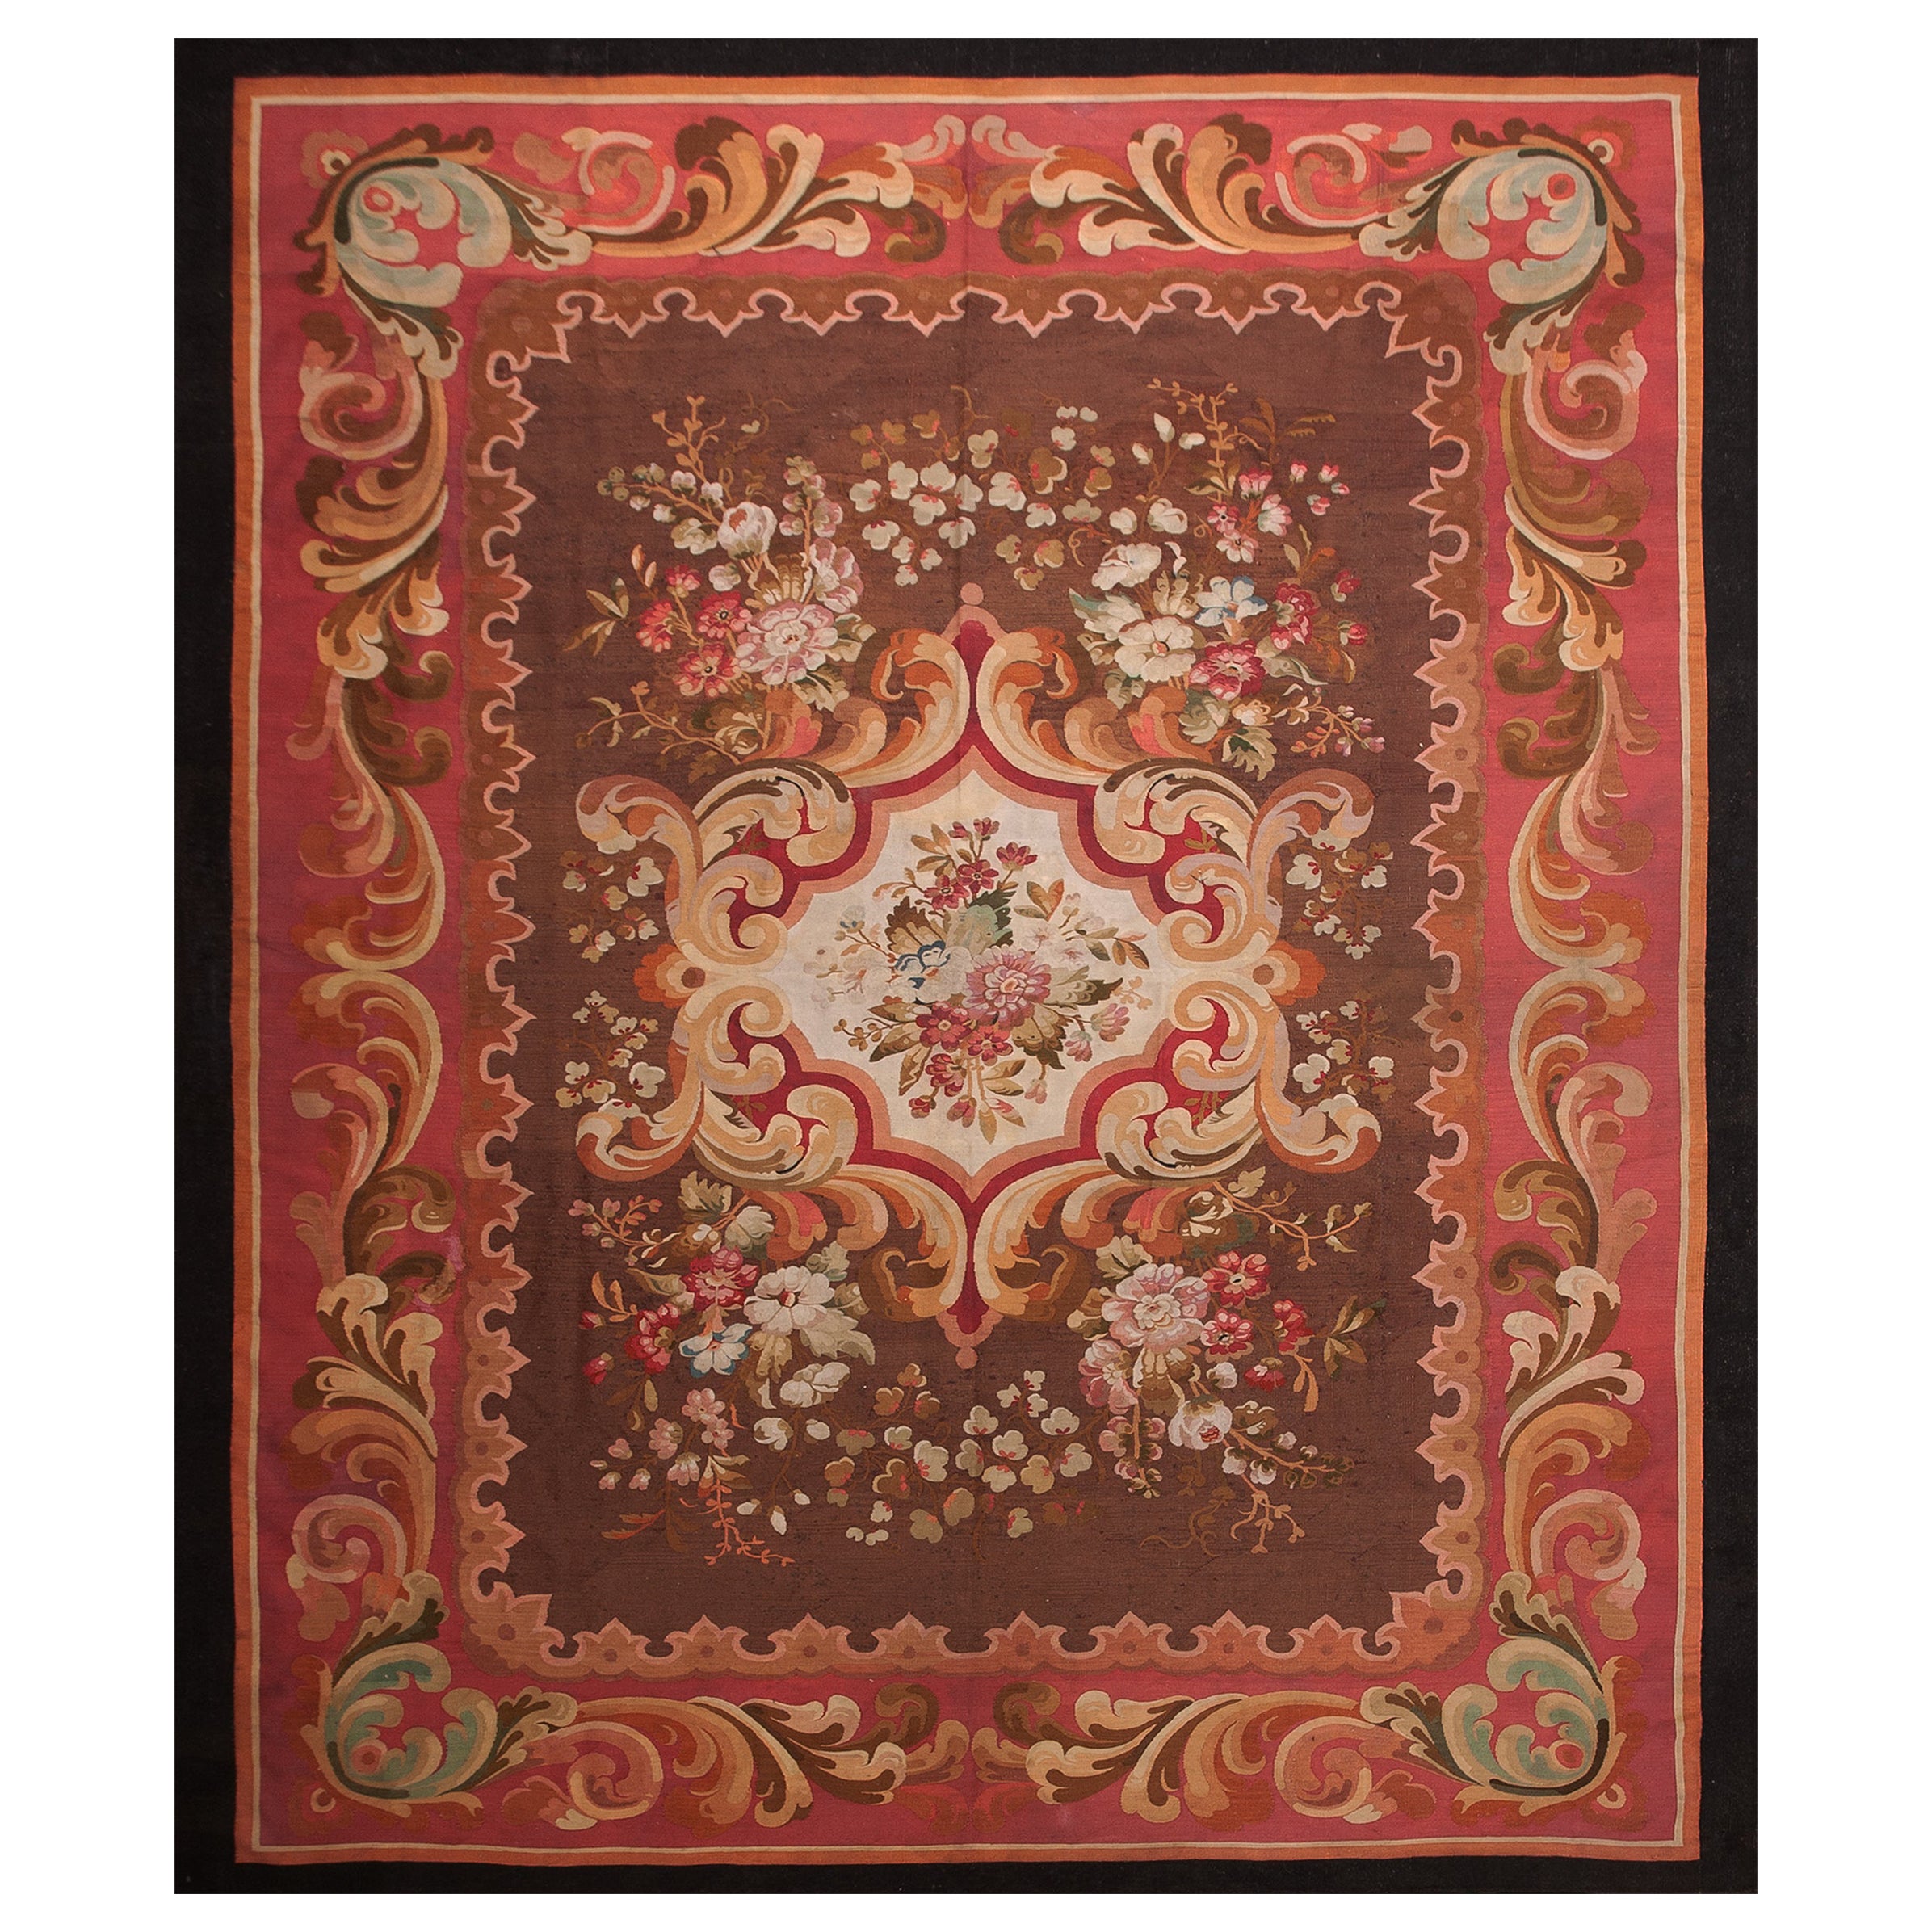 Large Antique French Aubusson Rug Handwoven Rug Pre-1900 10x12 Brown France For Sale